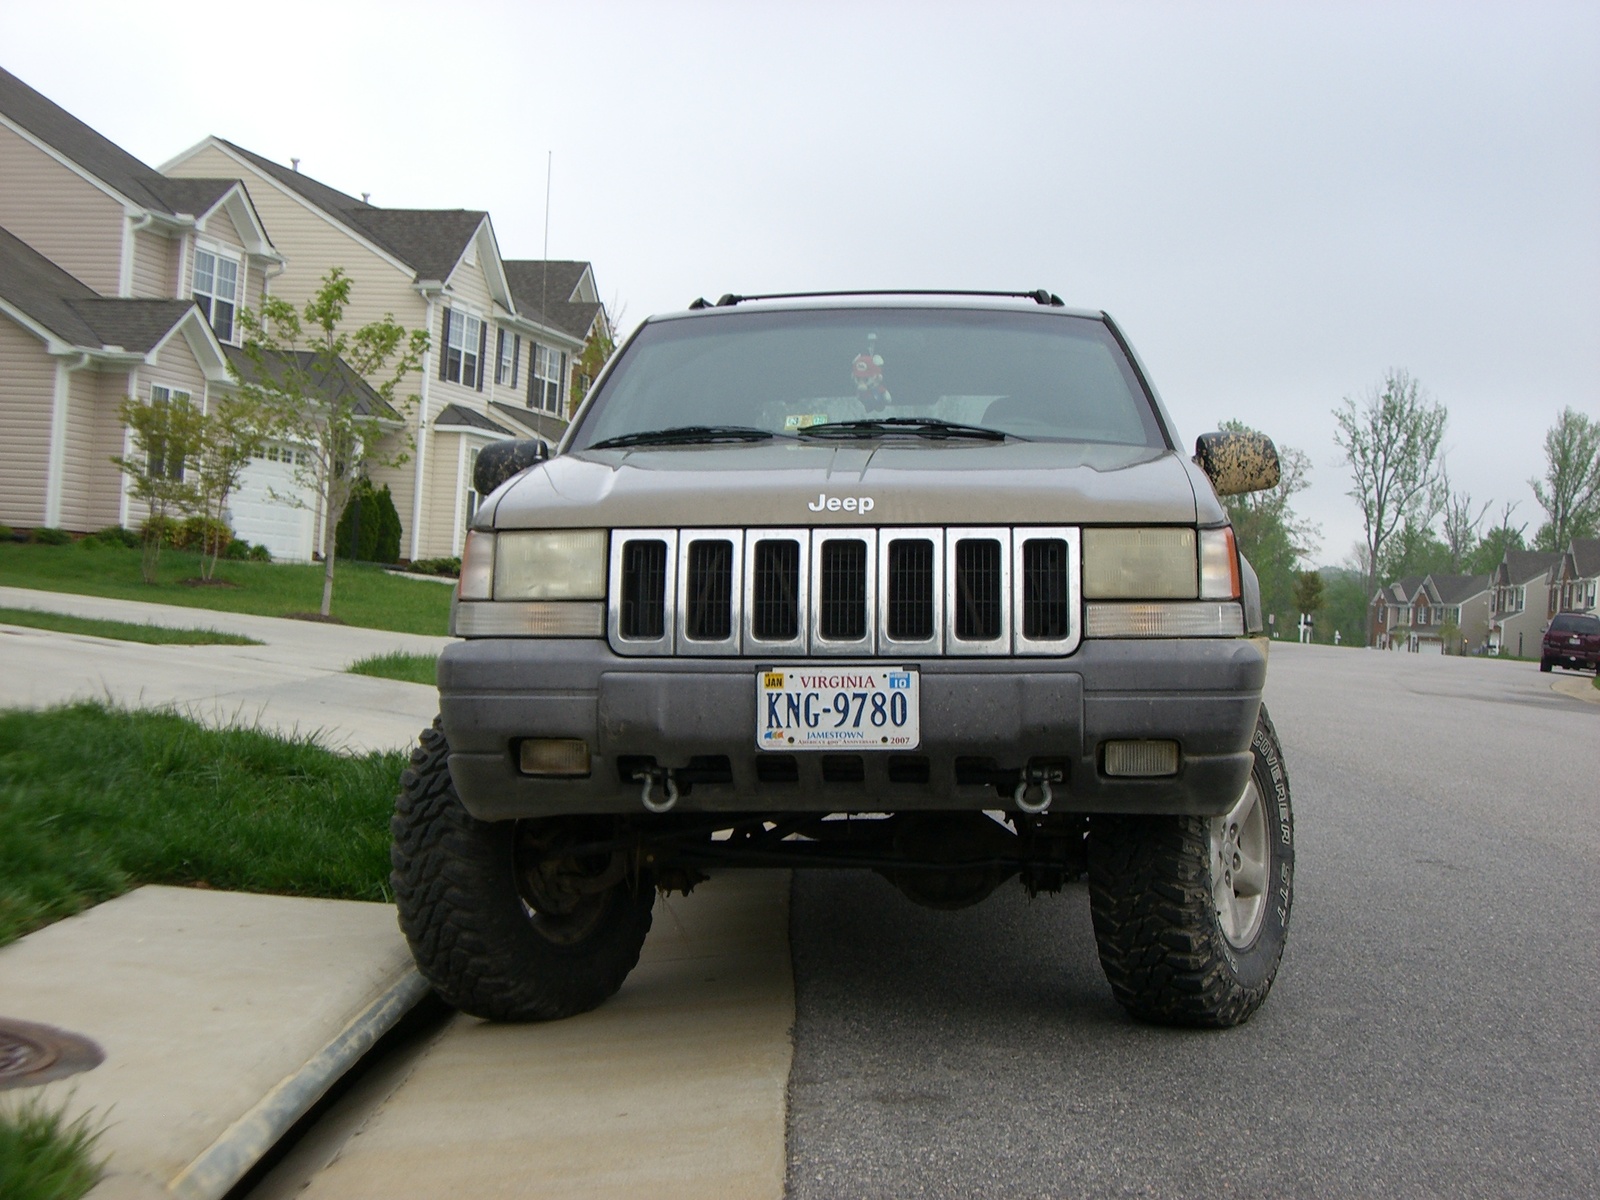 1995 Jeep cherokee owners manual download